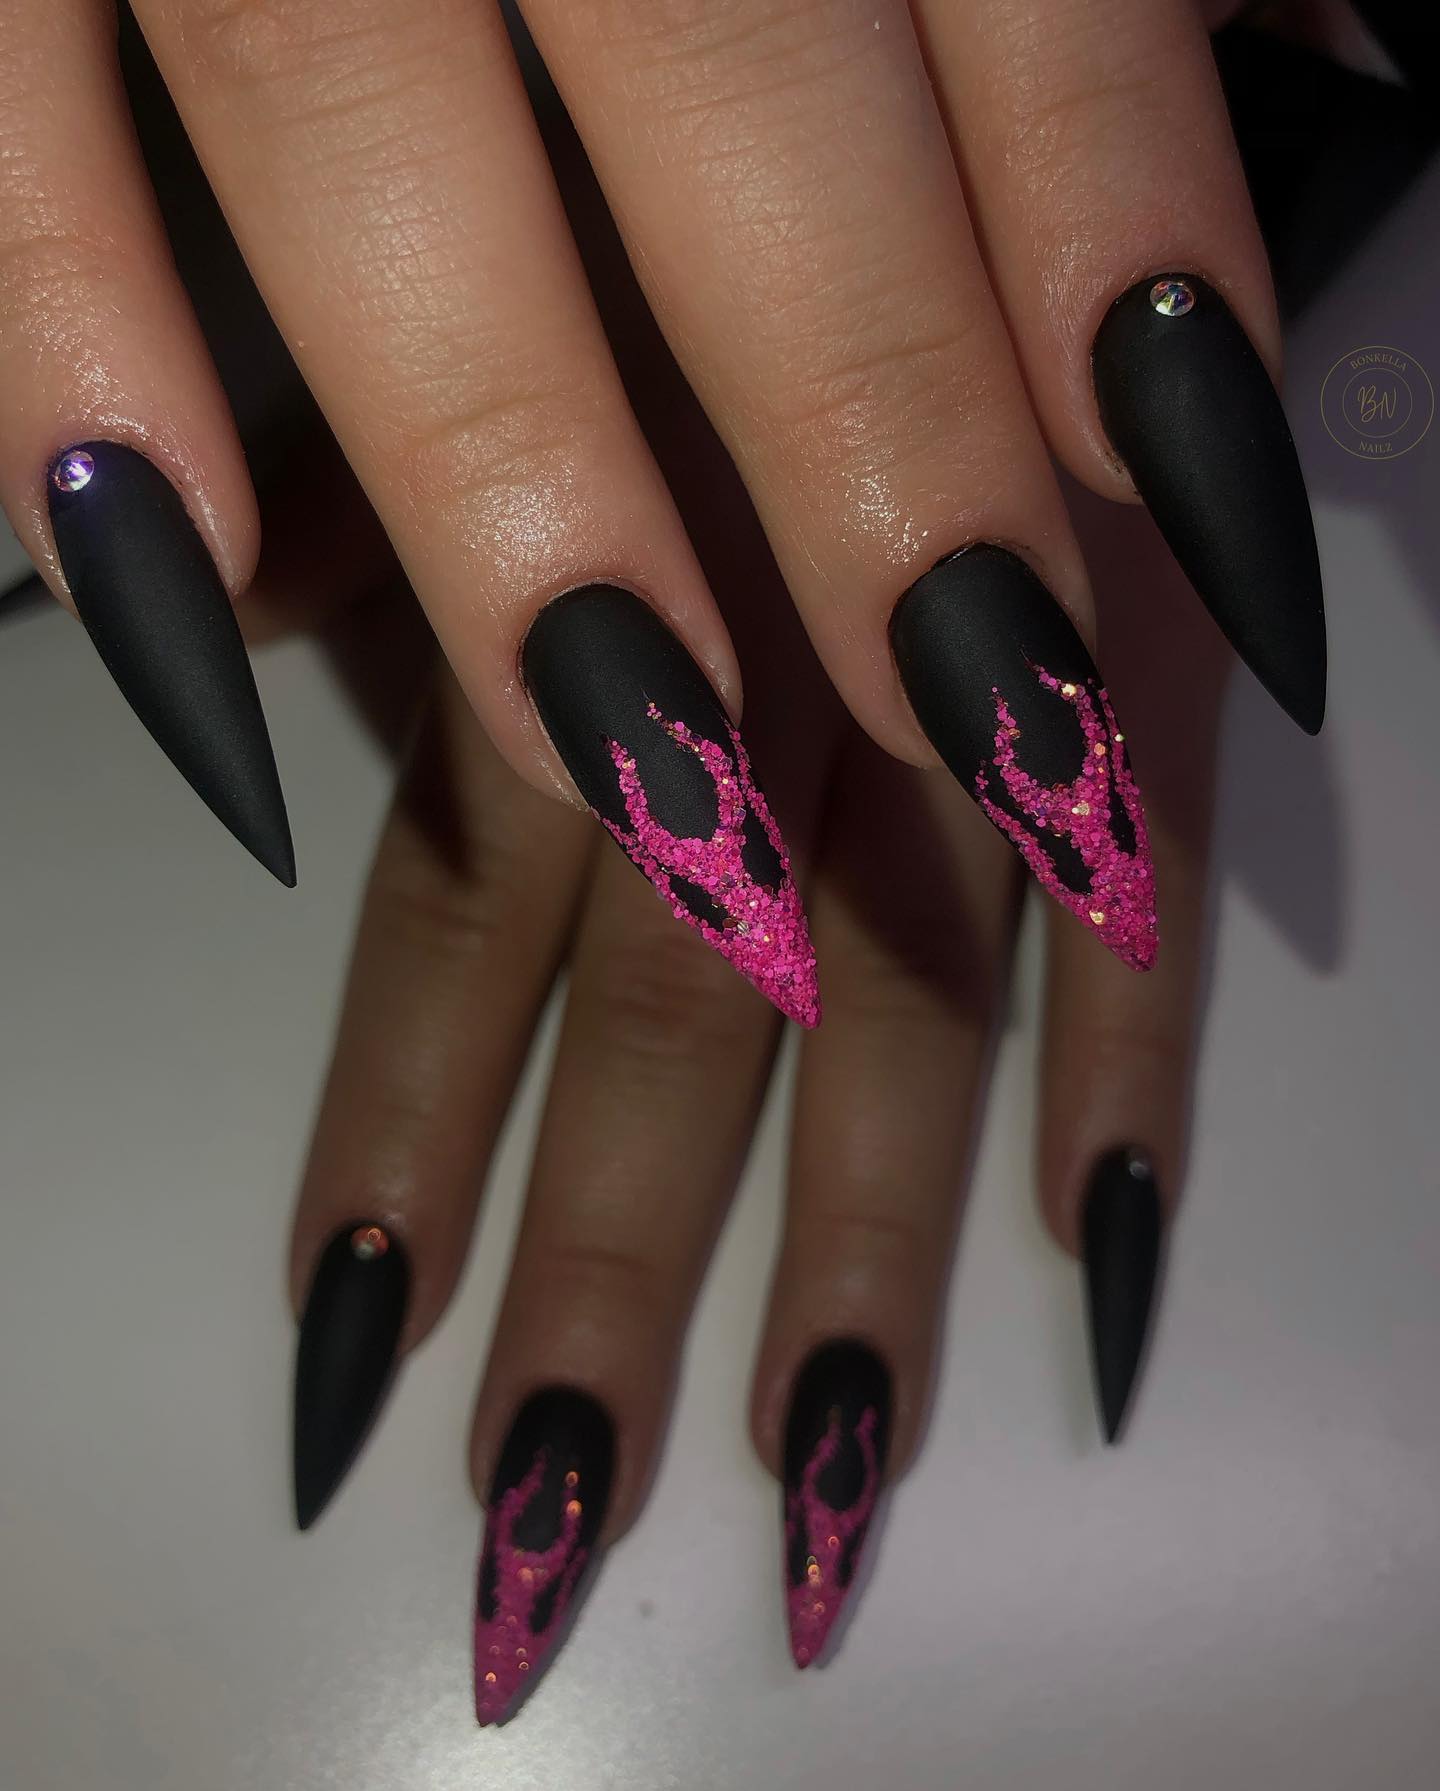 Matte black is one of those nail polish colors that is quite extraordinary to apply. If you want to try something new on your matte black nails, why not opt for glittered pink flames? Let's give it a shot.